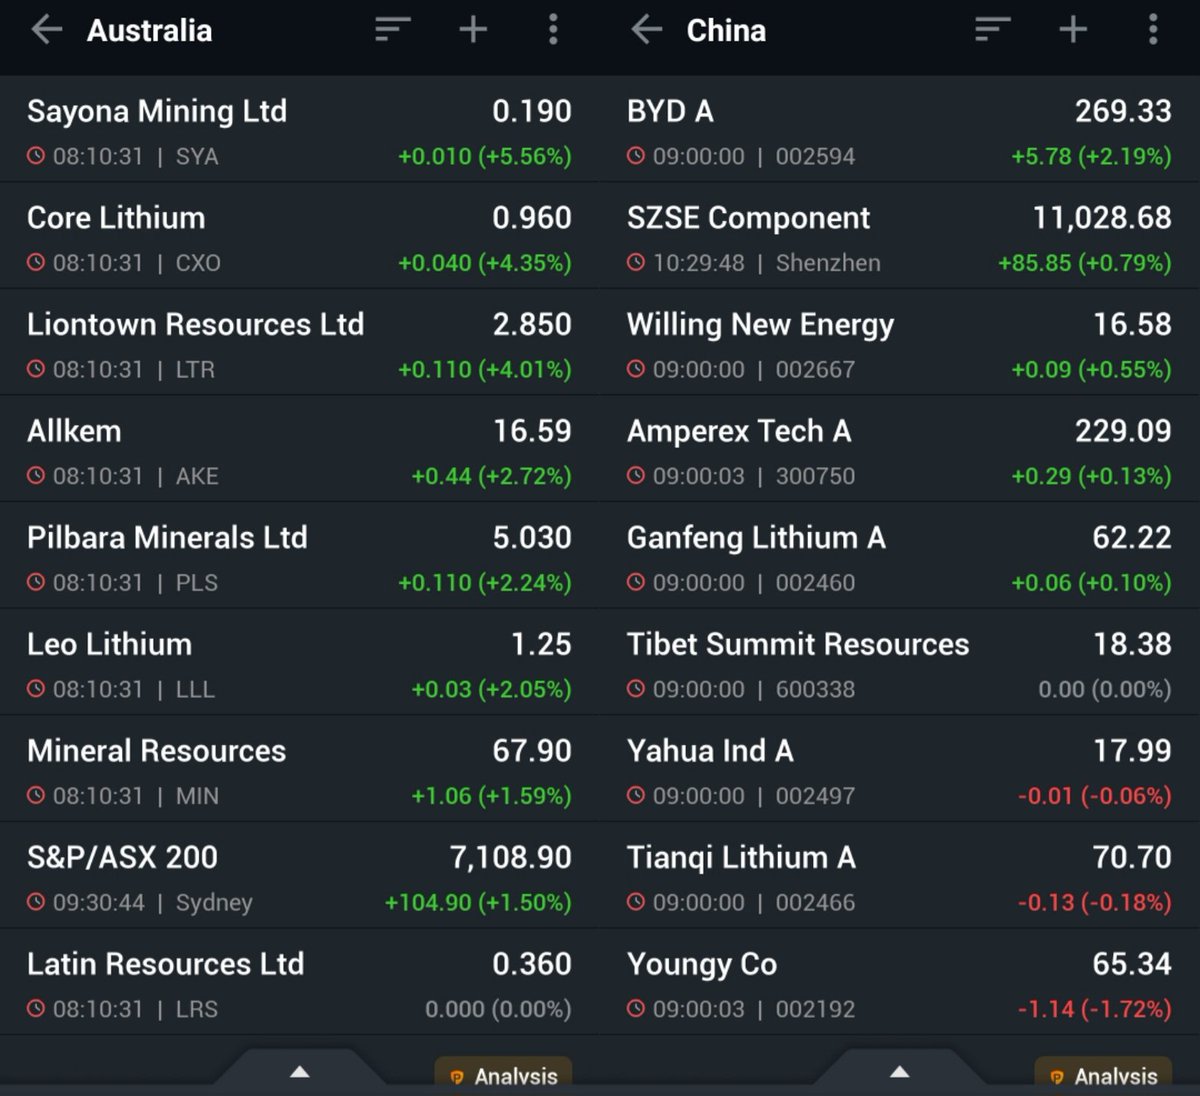 #Lithiumstocks continue to rally on positive spillover from Wall Street and expectations of more stimulus from China.
$SYA is up by 6% on promising drilling update on its Moblan lithium project in Canada.
#asxstocks #chinesestocks https://t.co/uUL0YMtoDb